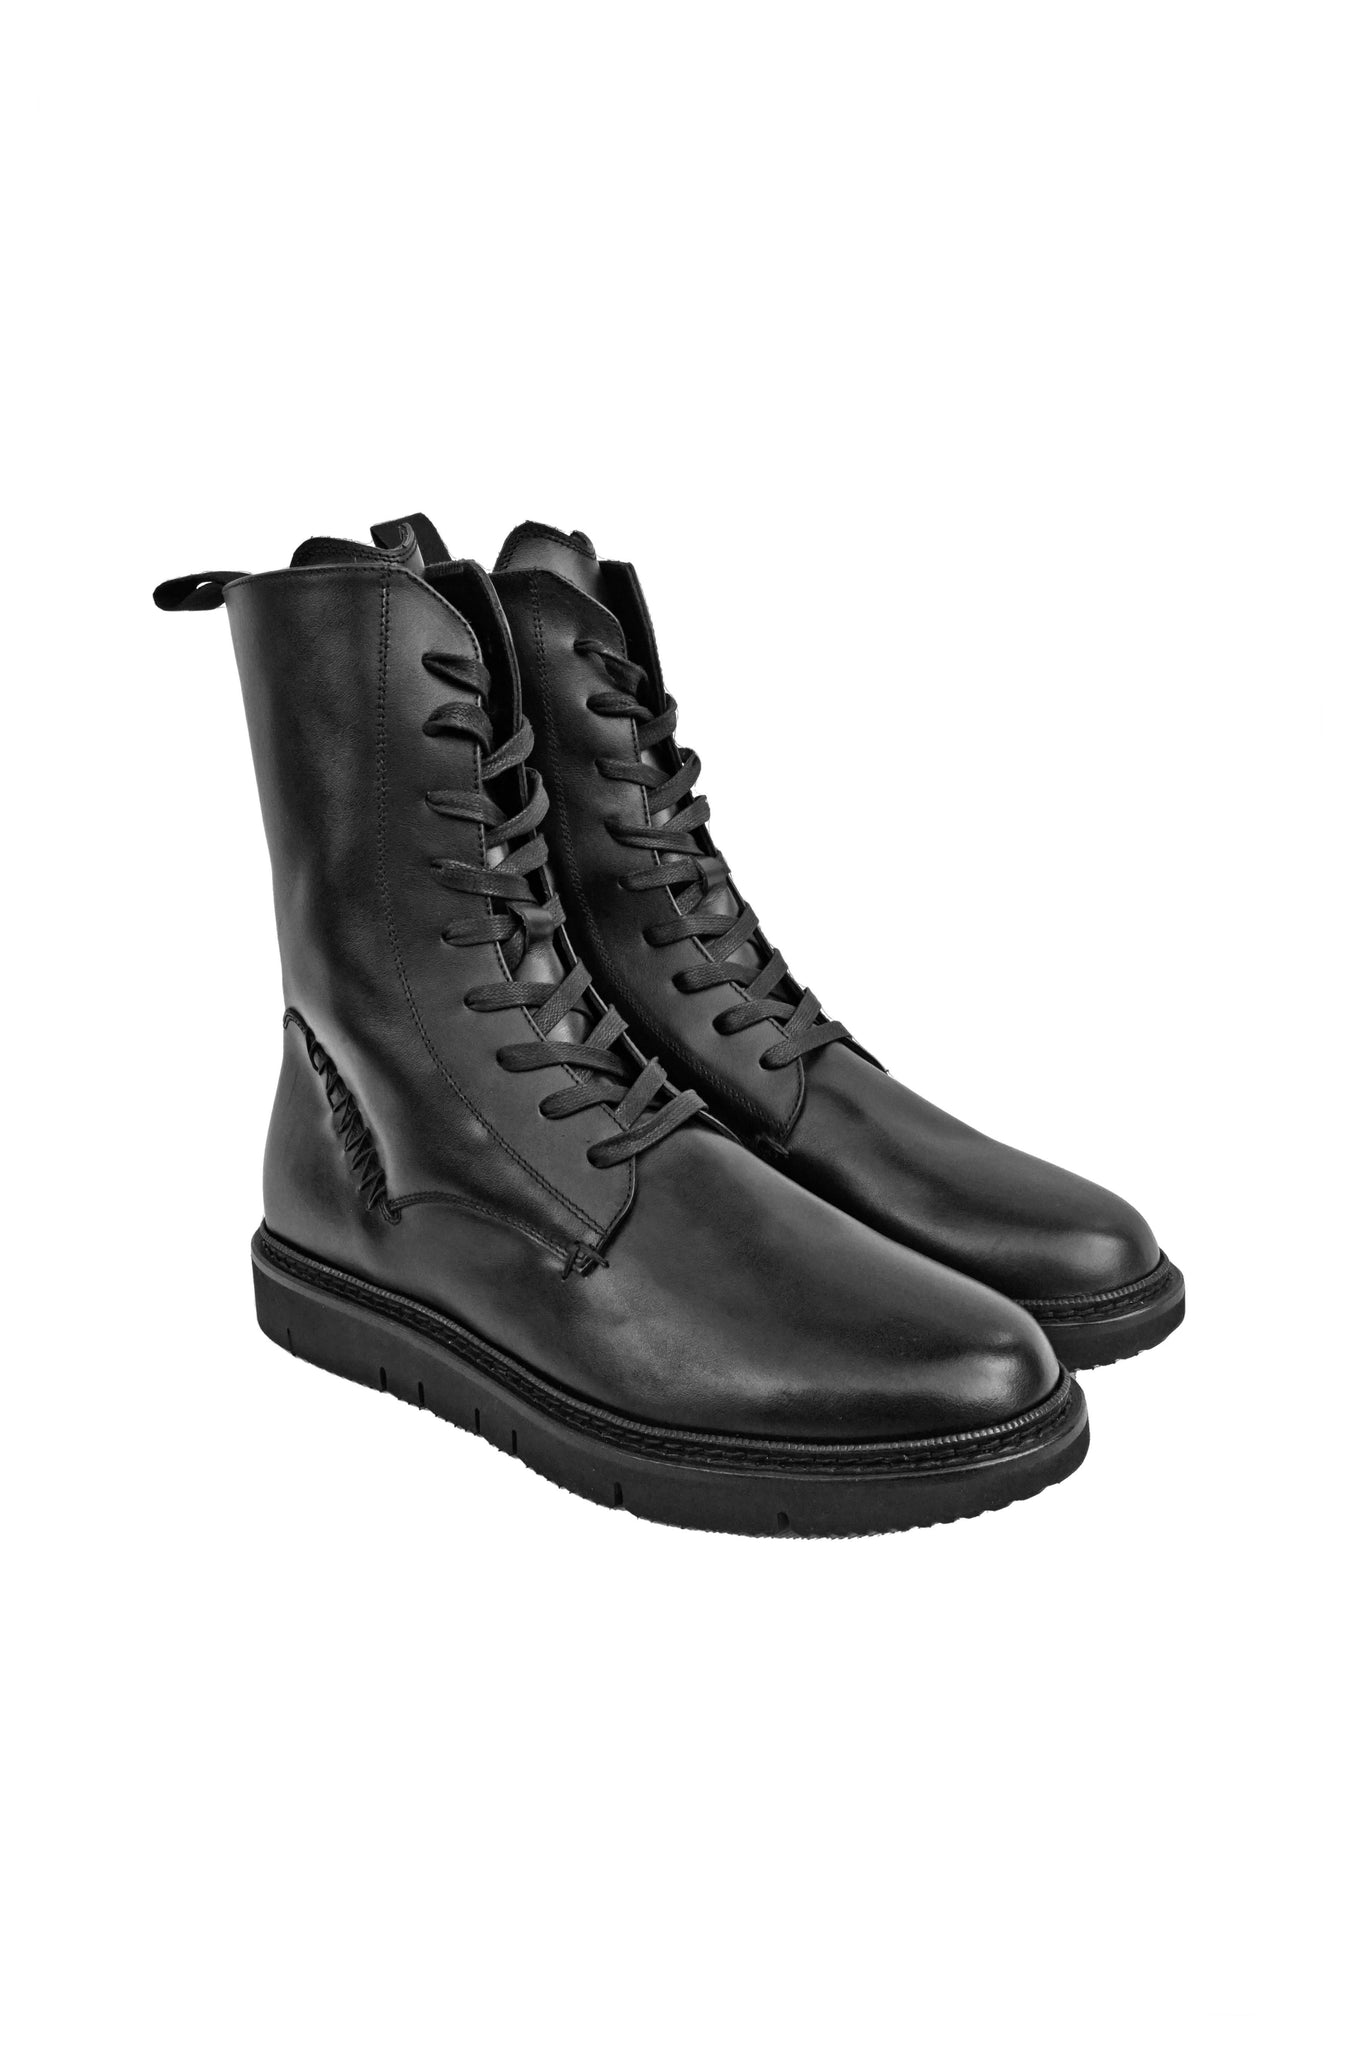 ST03 Lace Up Leather Boots